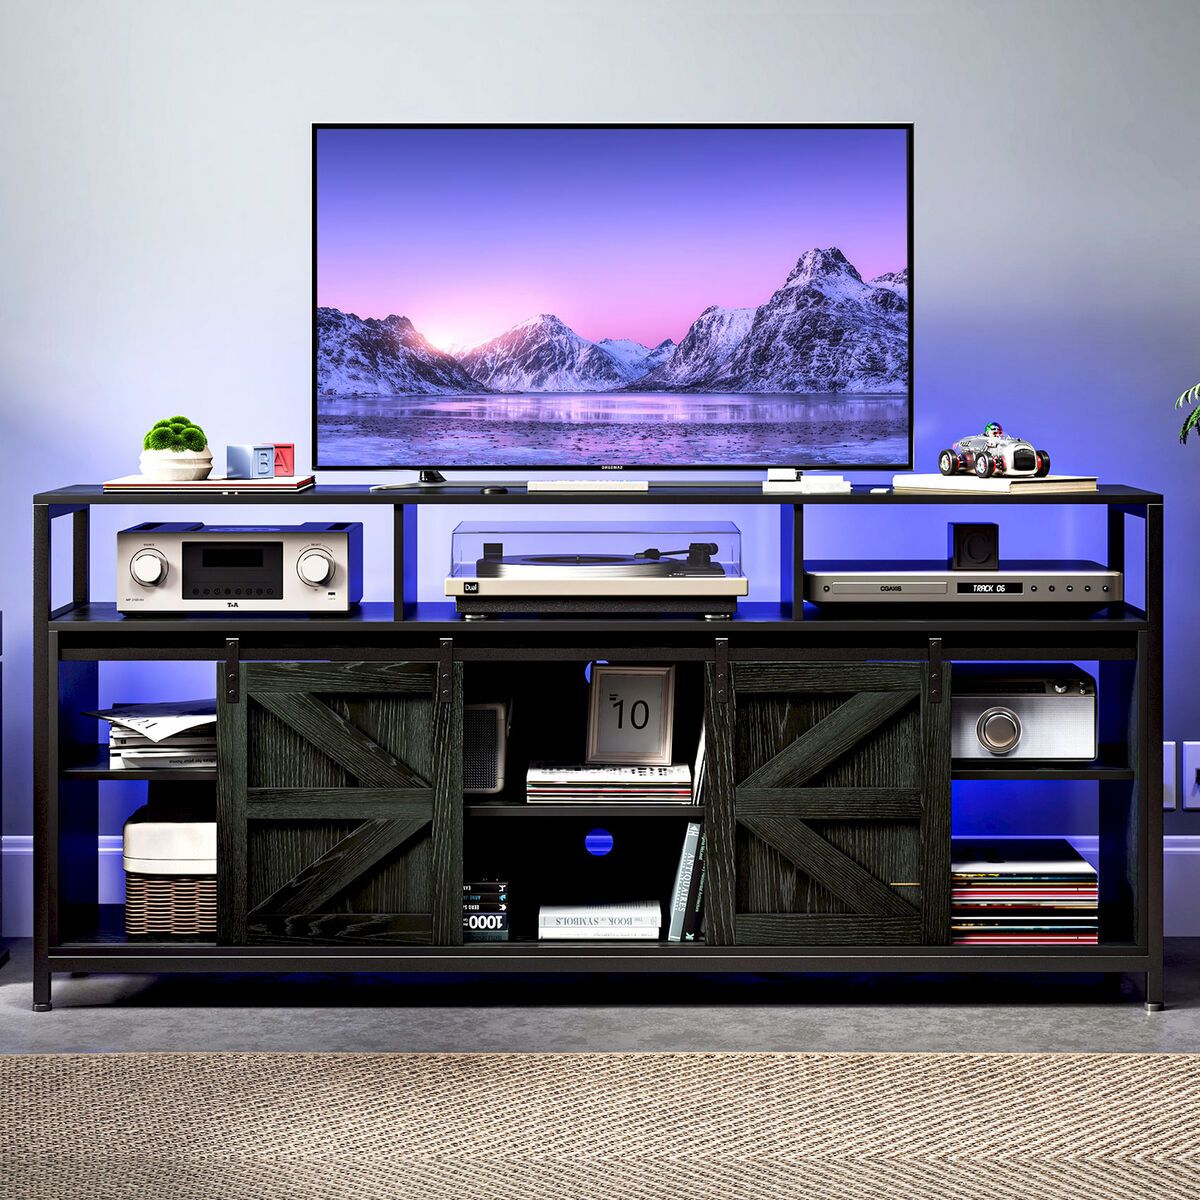 Tc Homeny Black Tv Stand With Rgb Led Light App & Remote Entertainment  Center | Ebay Intended For Black Rgb Entertainment Centers (View 4 of 15)